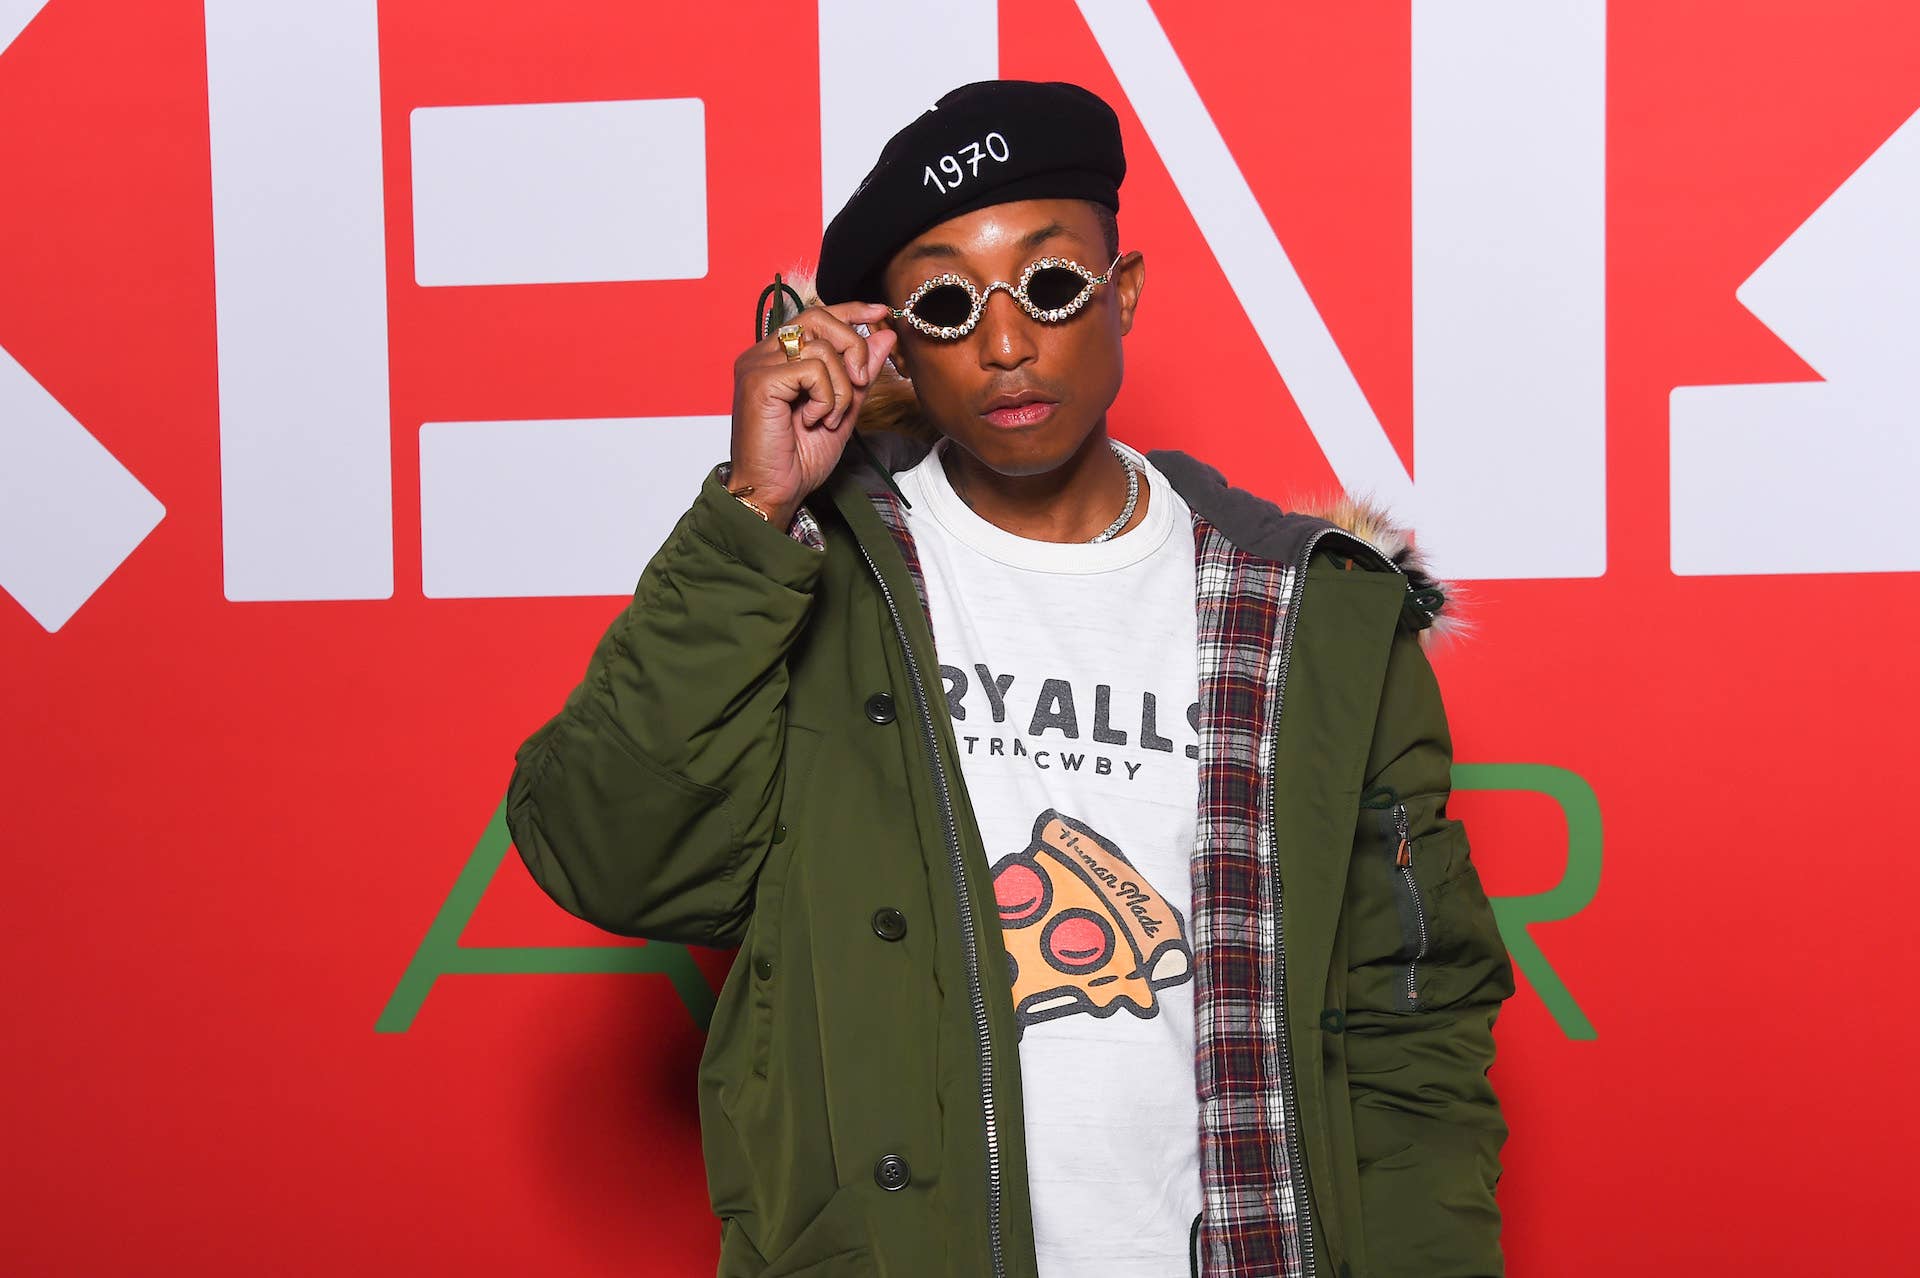 Pharrell Williams wearing a green jacket and sunglasses